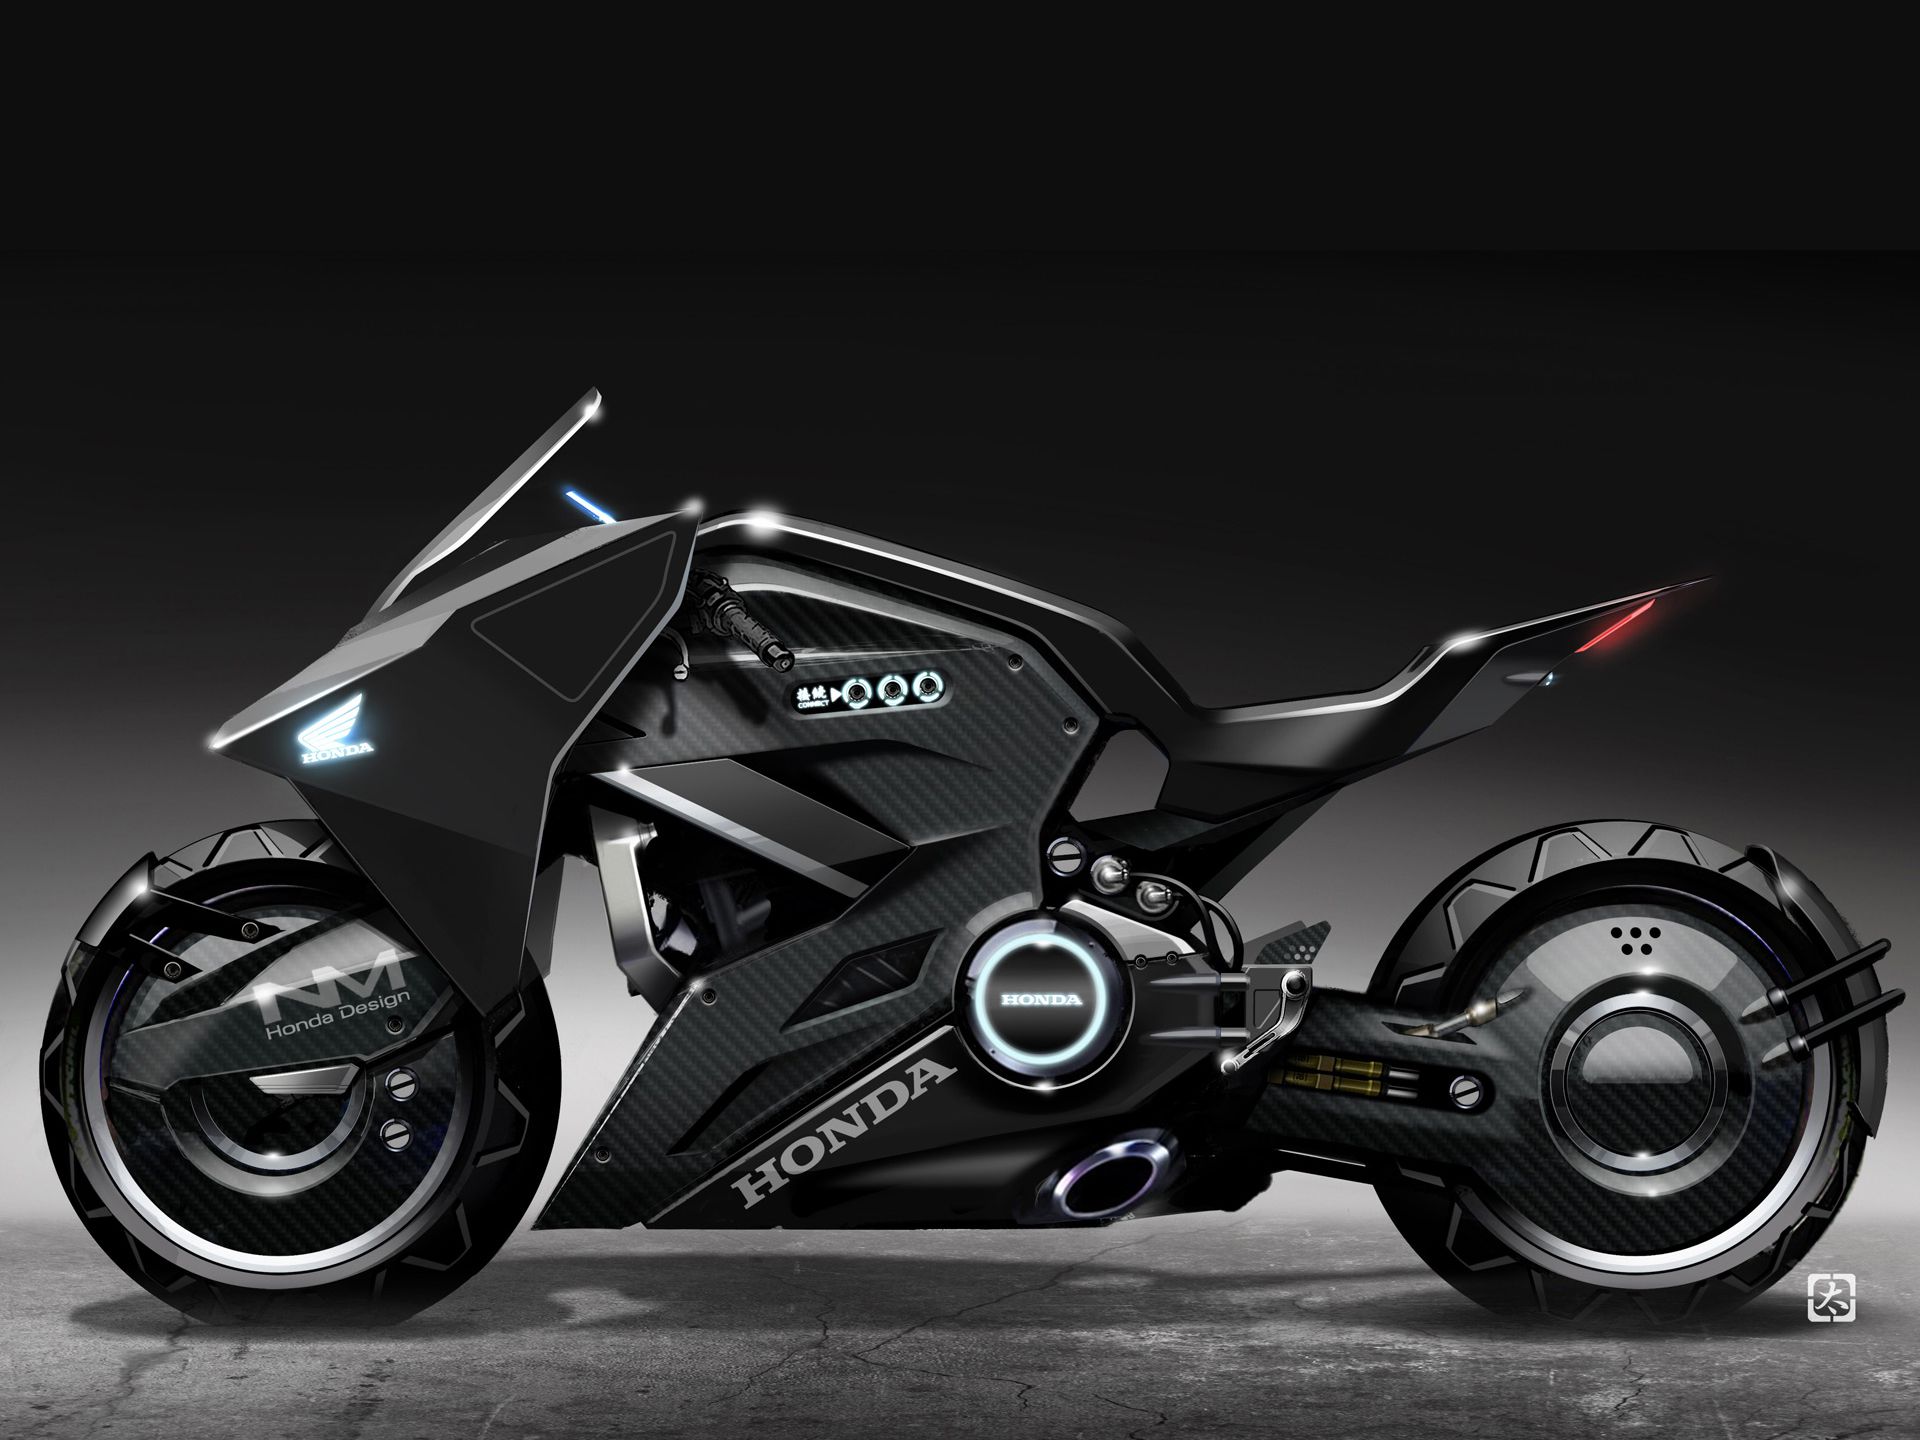 Ghost in the Shell Motorcycle | Motorcycle Cruiser